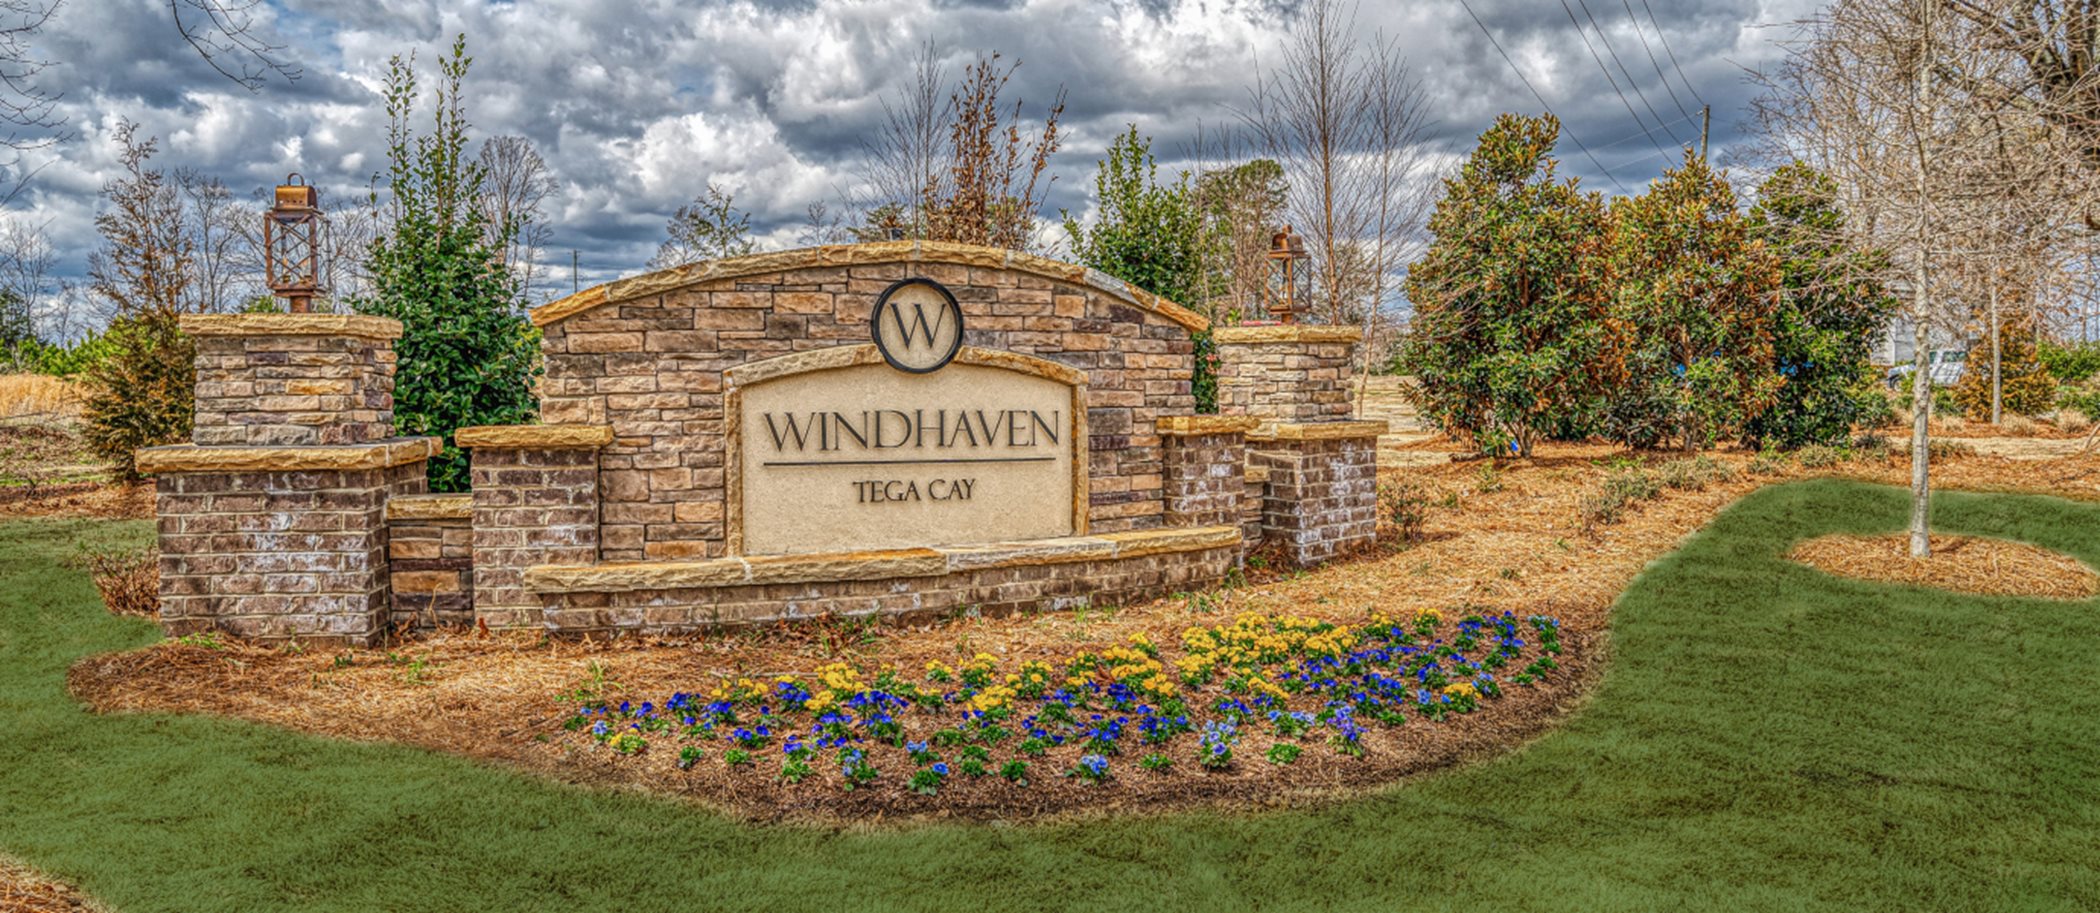 Windhaven welcome sign